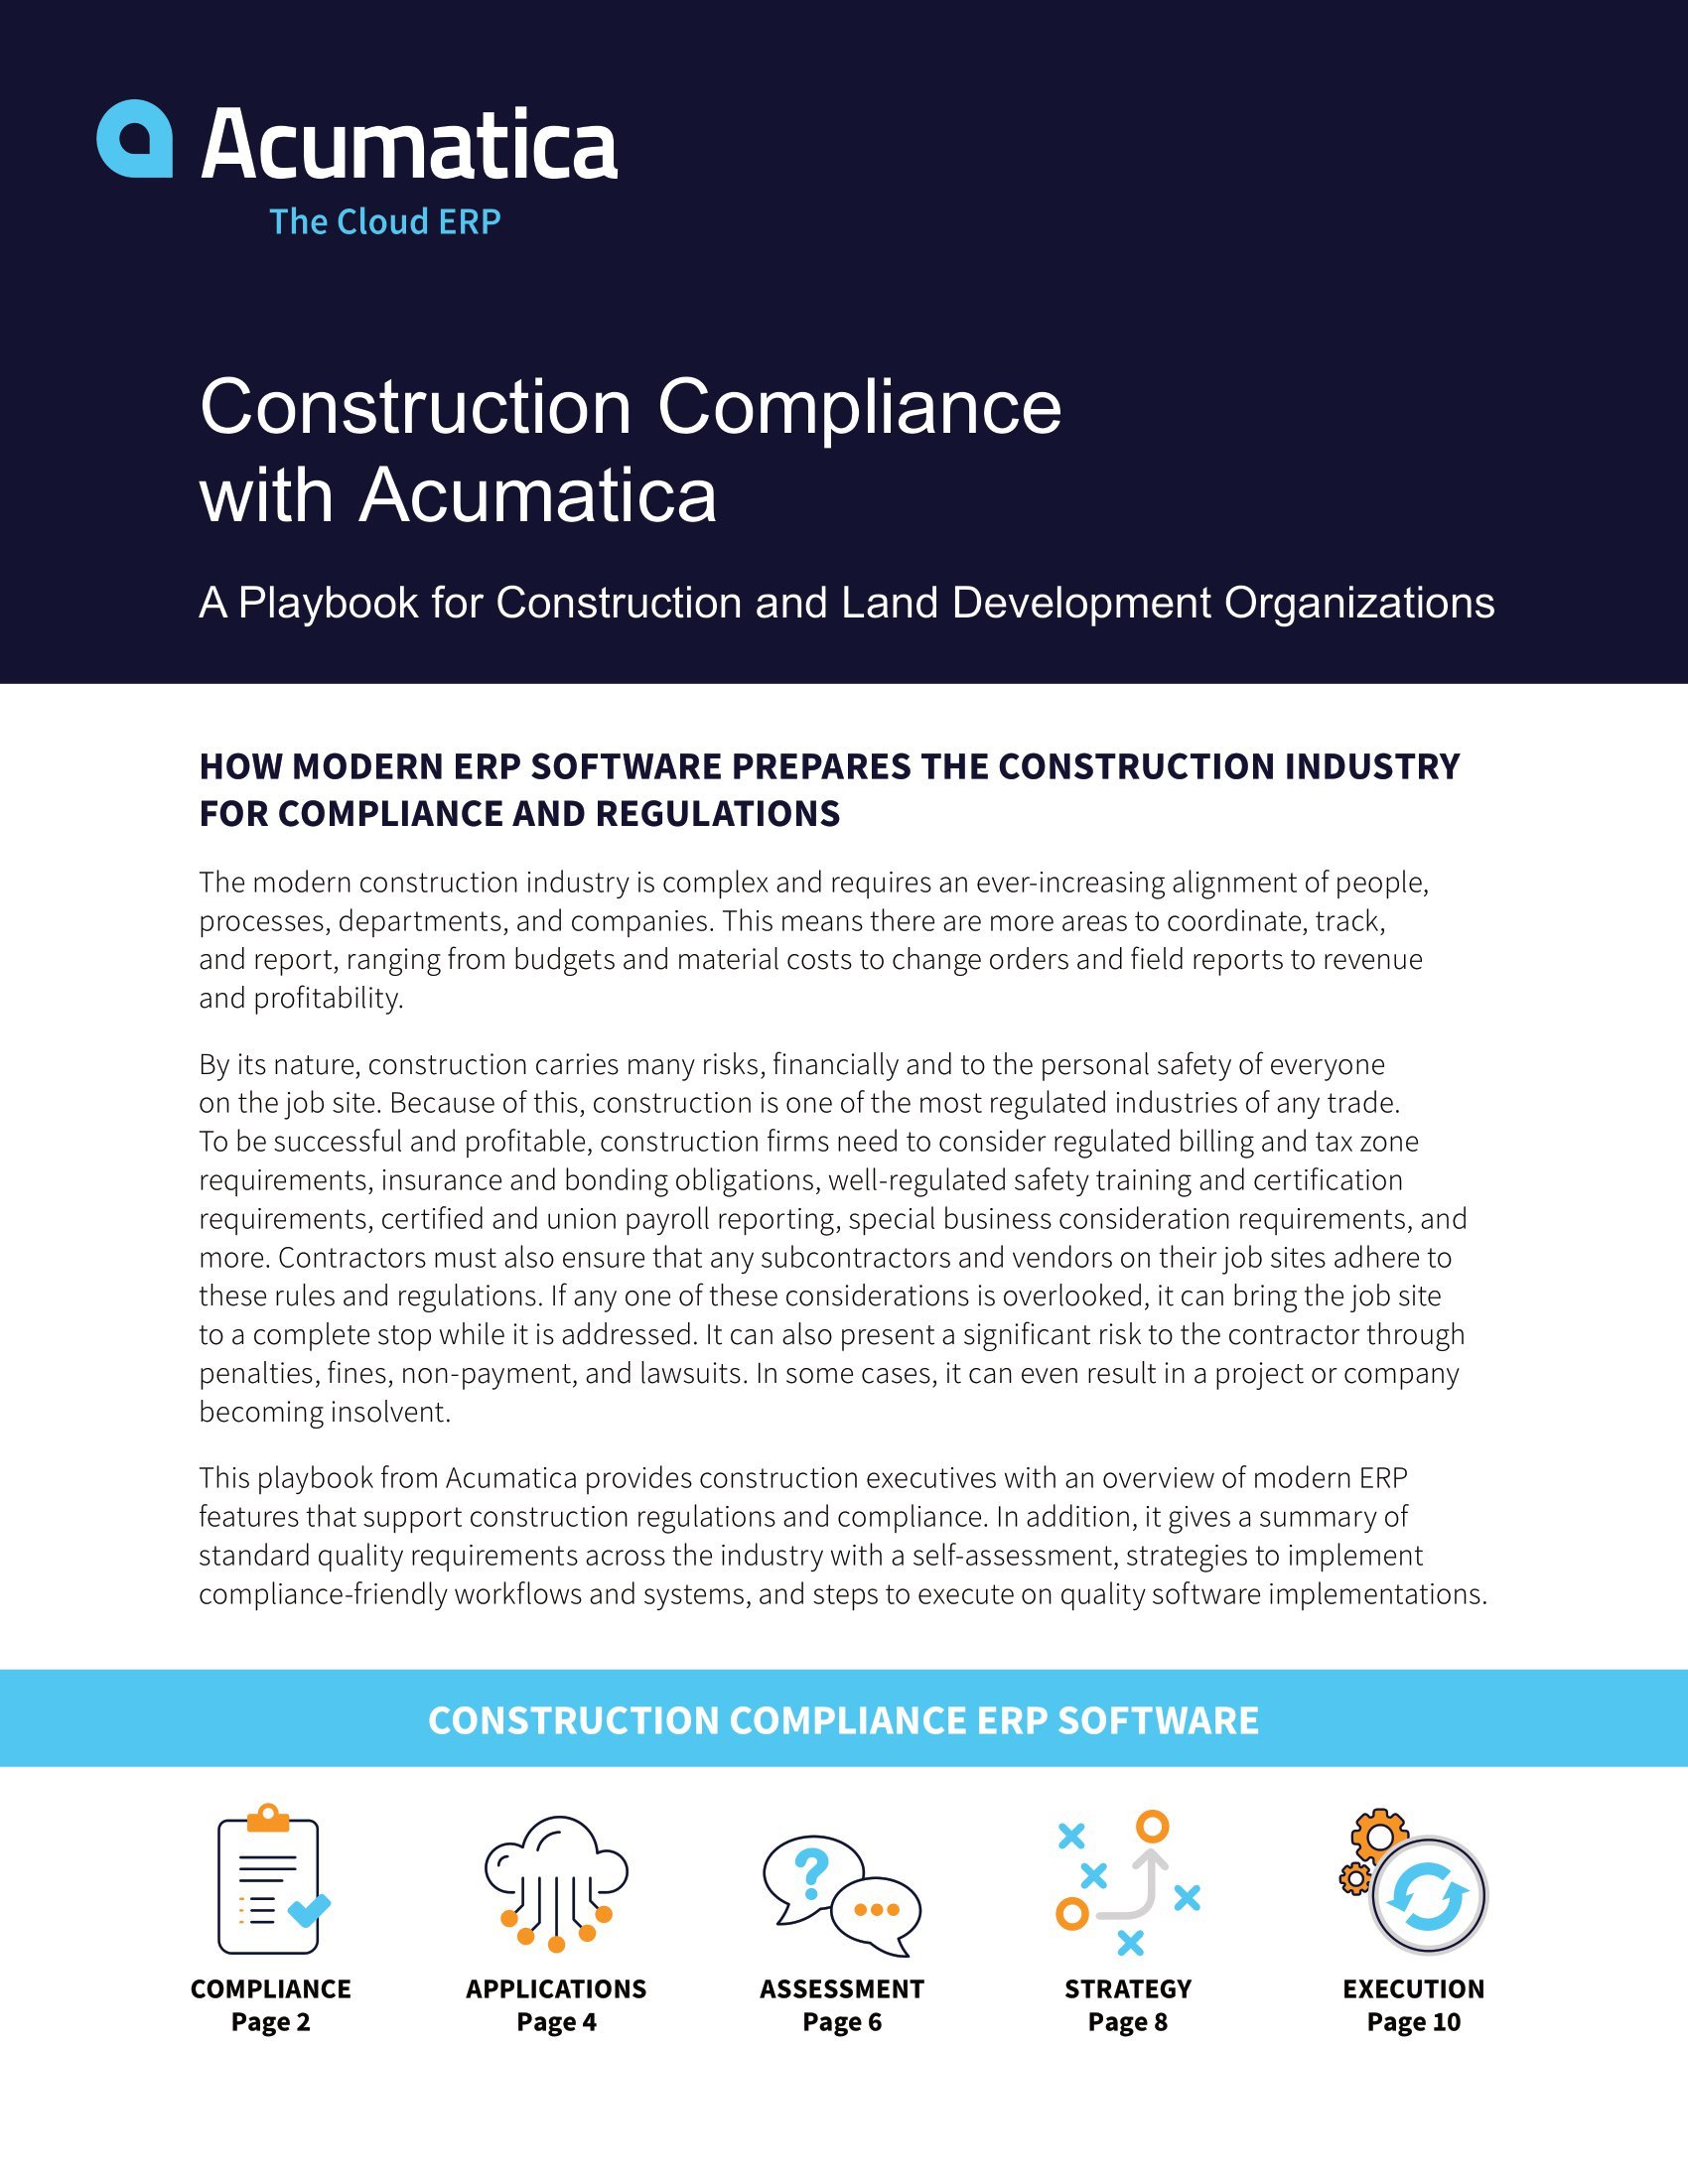 So Many Construction Regulations, So Easily Handled with the Right Construction Compliance Software